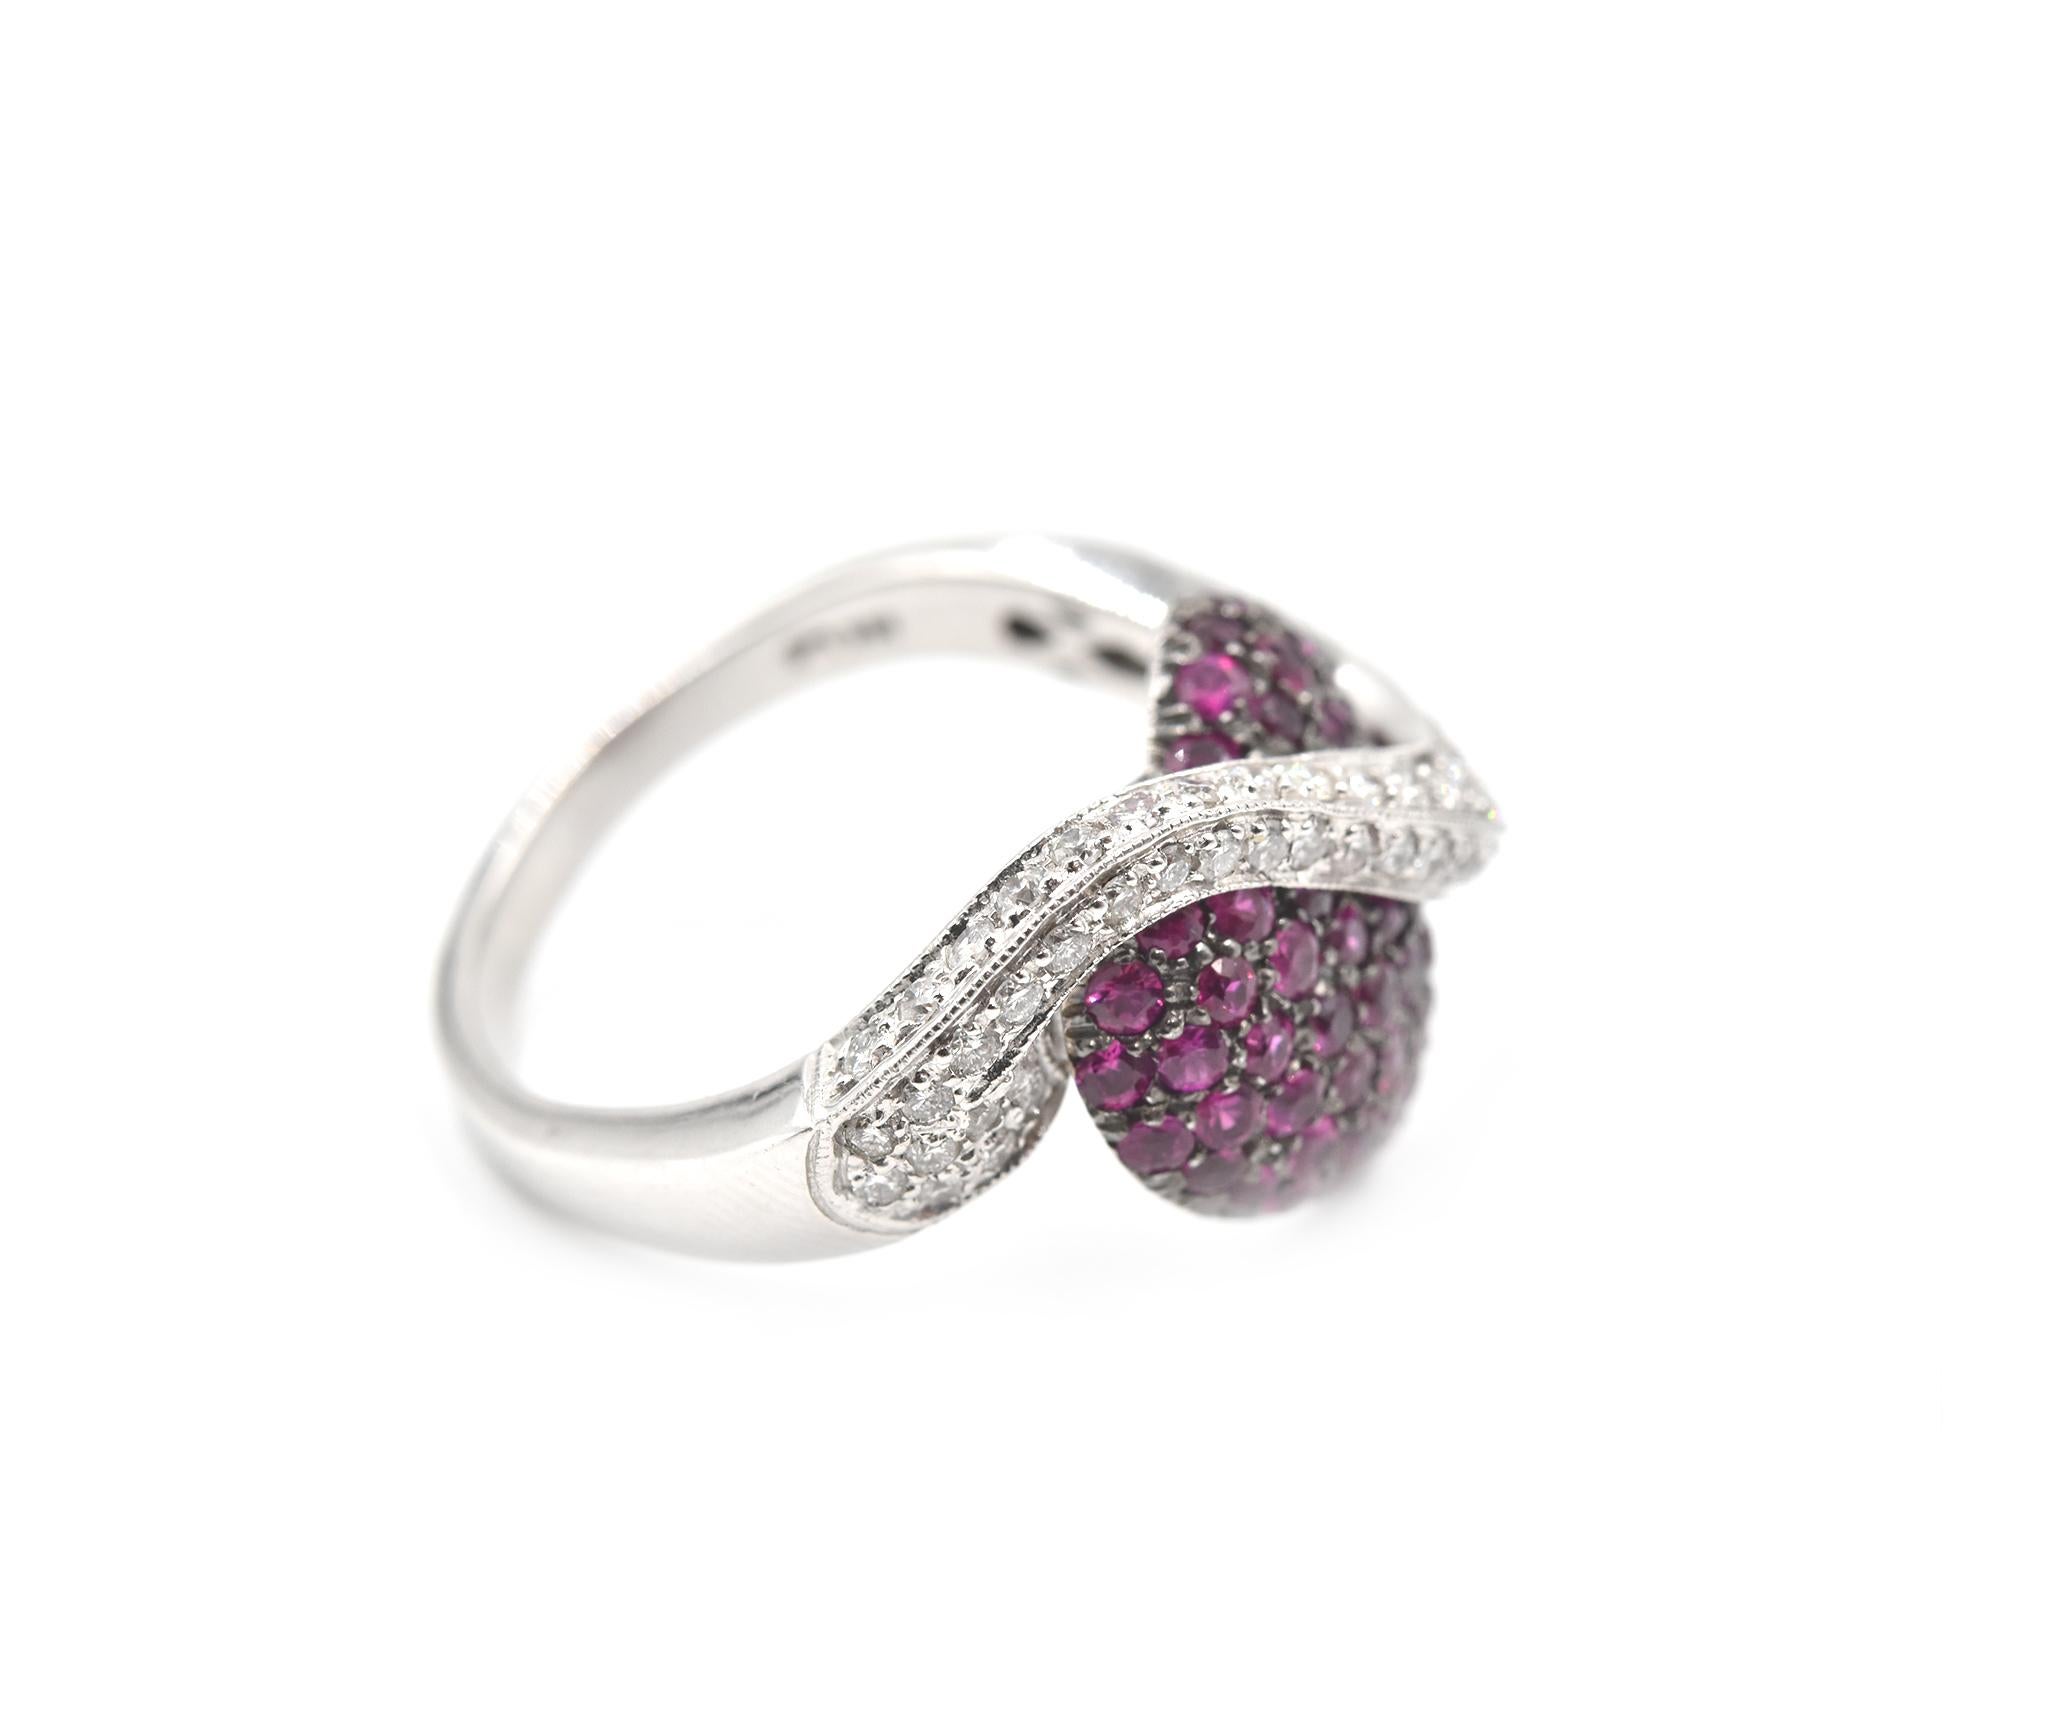 Designer: custom design
Material: 14k white gold
Ruby: 52 round ruby = 1.56cttw
Diamonds: 61 round brilliant cut = 1.00cttw
Color: G/H
Clarity: SI1		
Dimensions: 14.64mm length 
Ring Size: 10 (please allow two additional shipping days for sizing